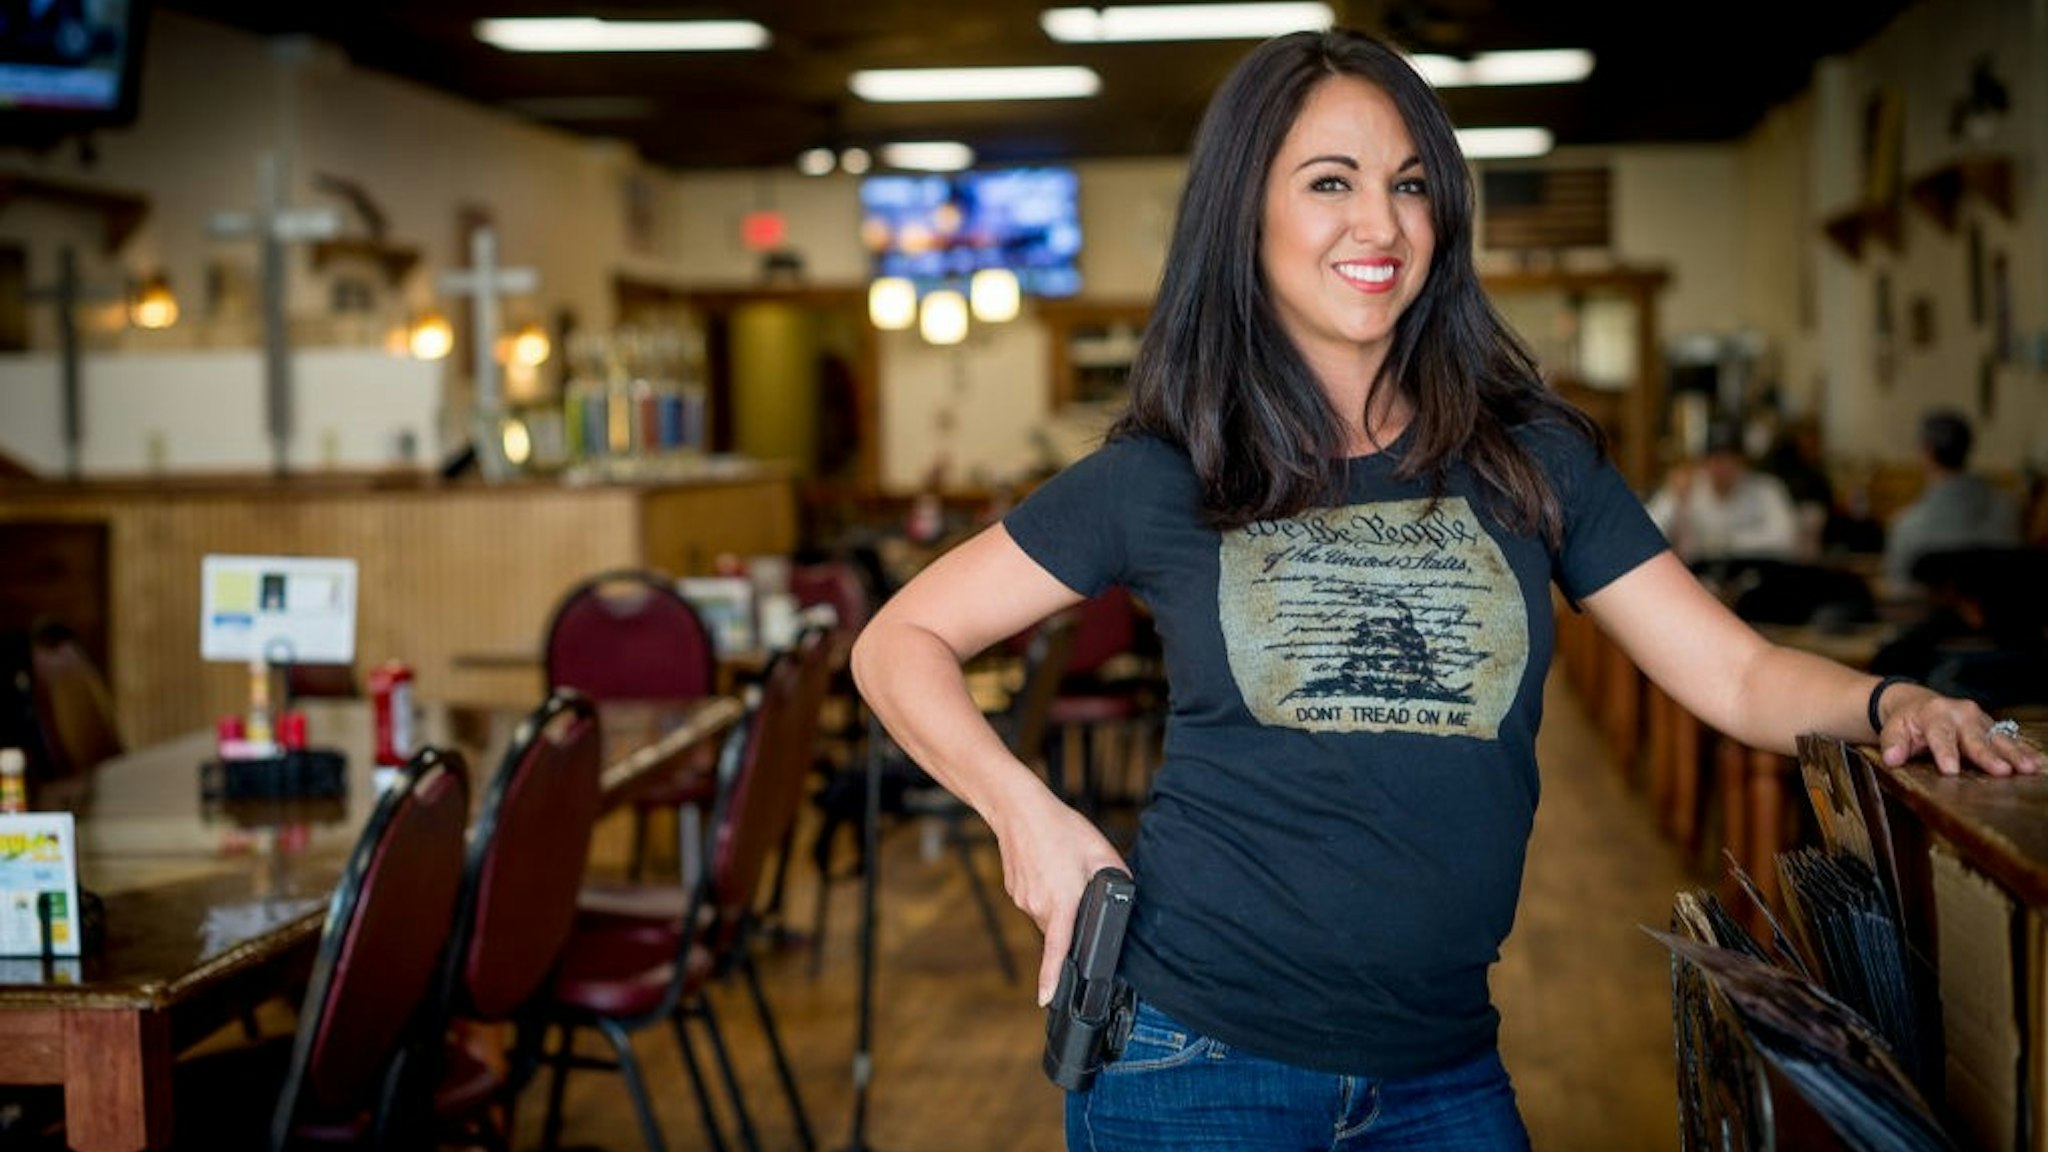 Owner Lauren Boebert poses for a portrait at Shooters Grill in Rifle, Colorado on April 24, 2018. - Lauren Boebert opened Shooters Grill in 2013 with her husband Jason in the small town of Rifle, Colorado, the only city in the United States named after a gun according to them. Shortly after Boebert opened the restaurant, there was a murder in the alley behind it. Boebert went next door to the Tradesmen Gun Store and Pawnshop to speak to the owner, Edward Wilks. Wilks explained to her that you dont need a permit in the state of Colorado to open carry. The next day she started carrying a gun with her. The majority of her staff carries, while it is not a requirement to work there she encourages them to do so if they feel comfortable with it. Customers are also welcome to carry firearms on them as well. The restaurants theme remained heavily country western but revolves alot around the theme of the Second Amendment as well. (Photo by EMILY KASK / AFP) (Photo credit should read